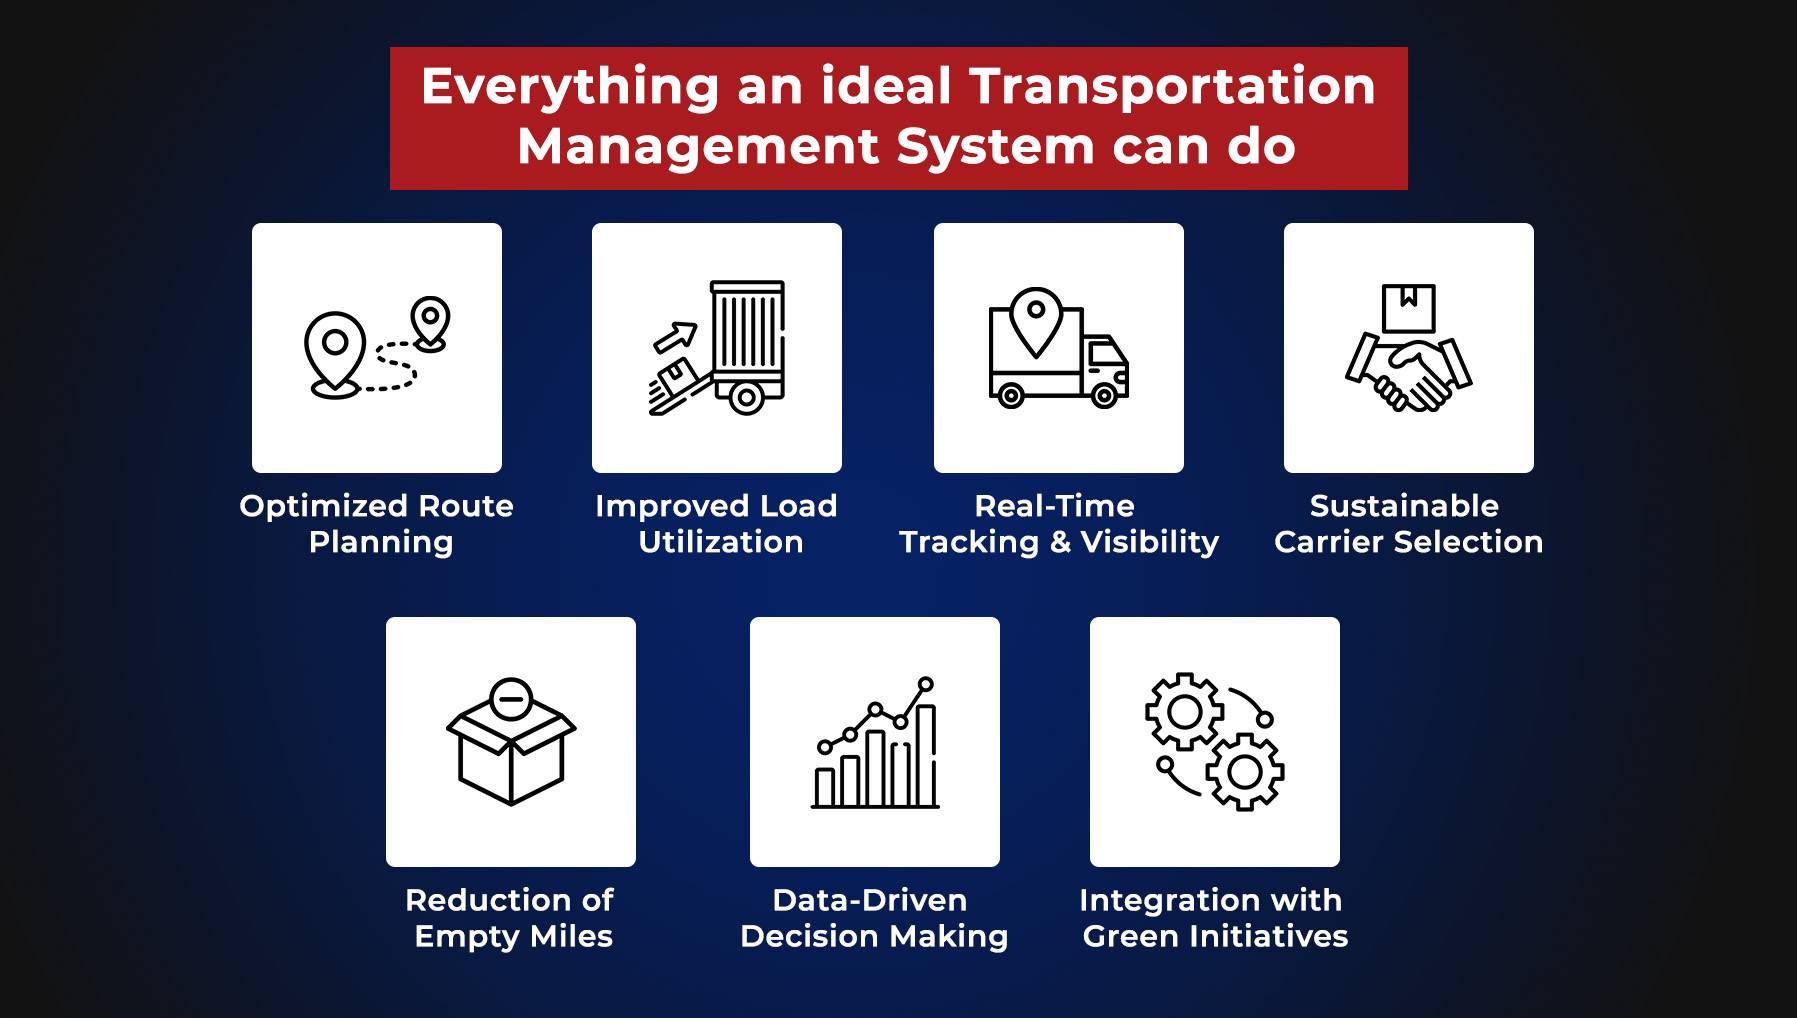 What does an ideal transportation management system do